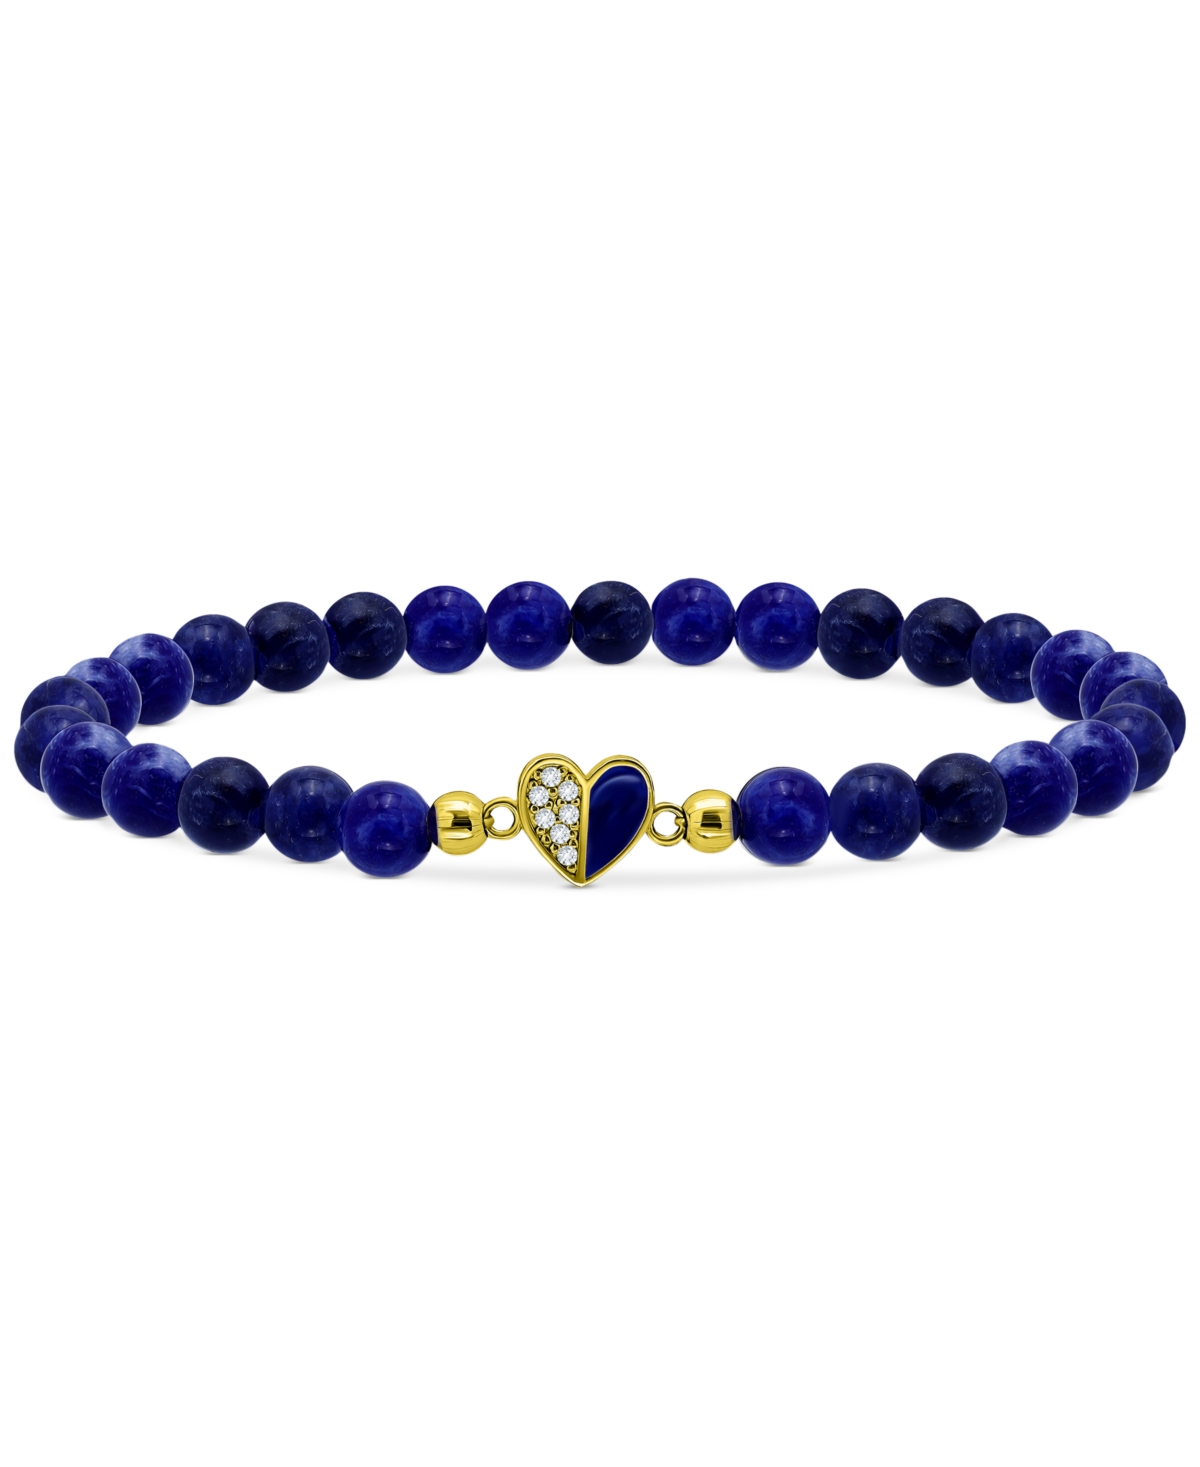 Sodalite Bead & Cubic Zirconia Heart Stretch Bracelet, Created for Macy's - Gold